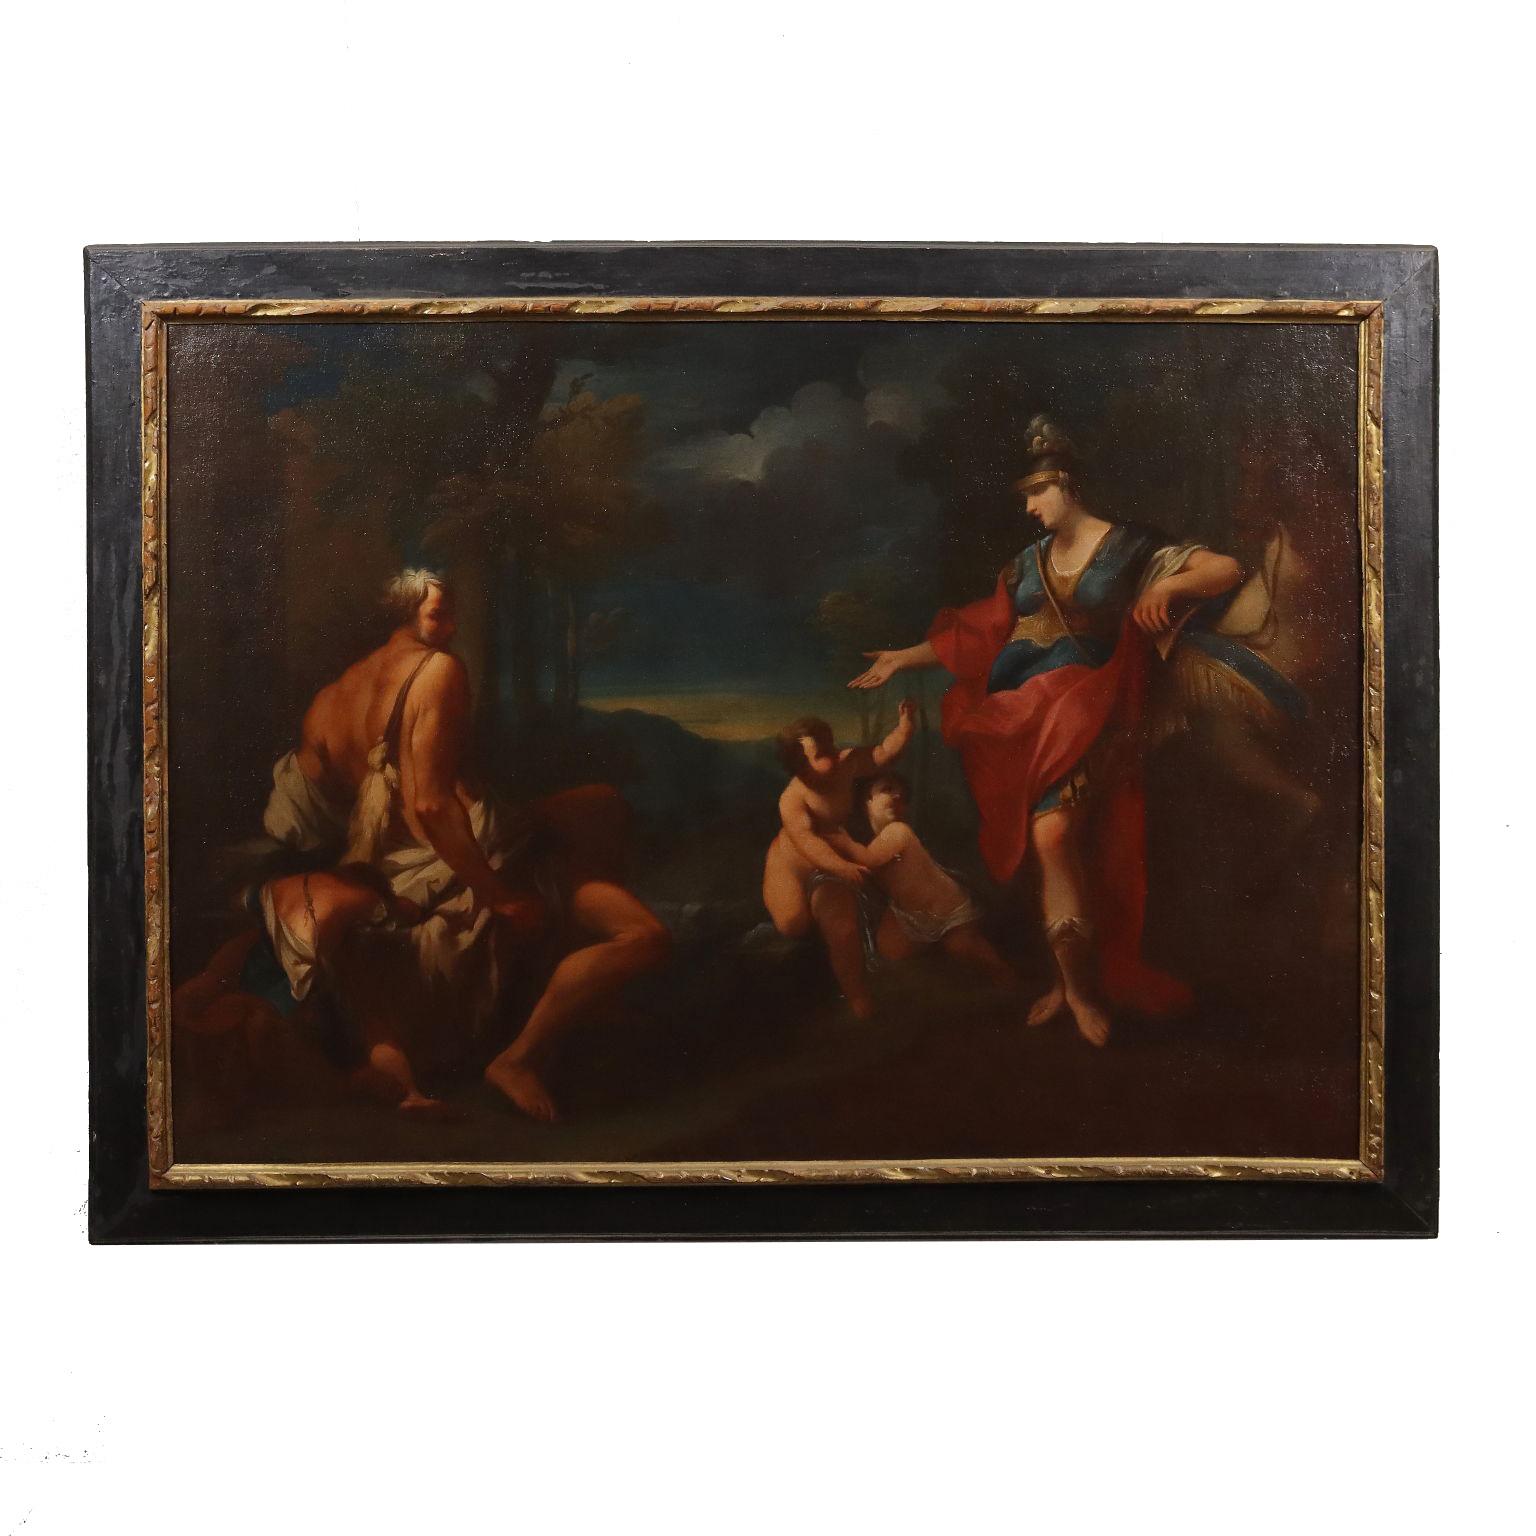 Oil painting on canvas. The large canvas recounts an episode taken from the Gerusalemme Liberata by Torquato Tasso, in which the young Erminia, princess of Antioch secretly in love with Tancredi, witnesses the wounding of her beloved in a duel.